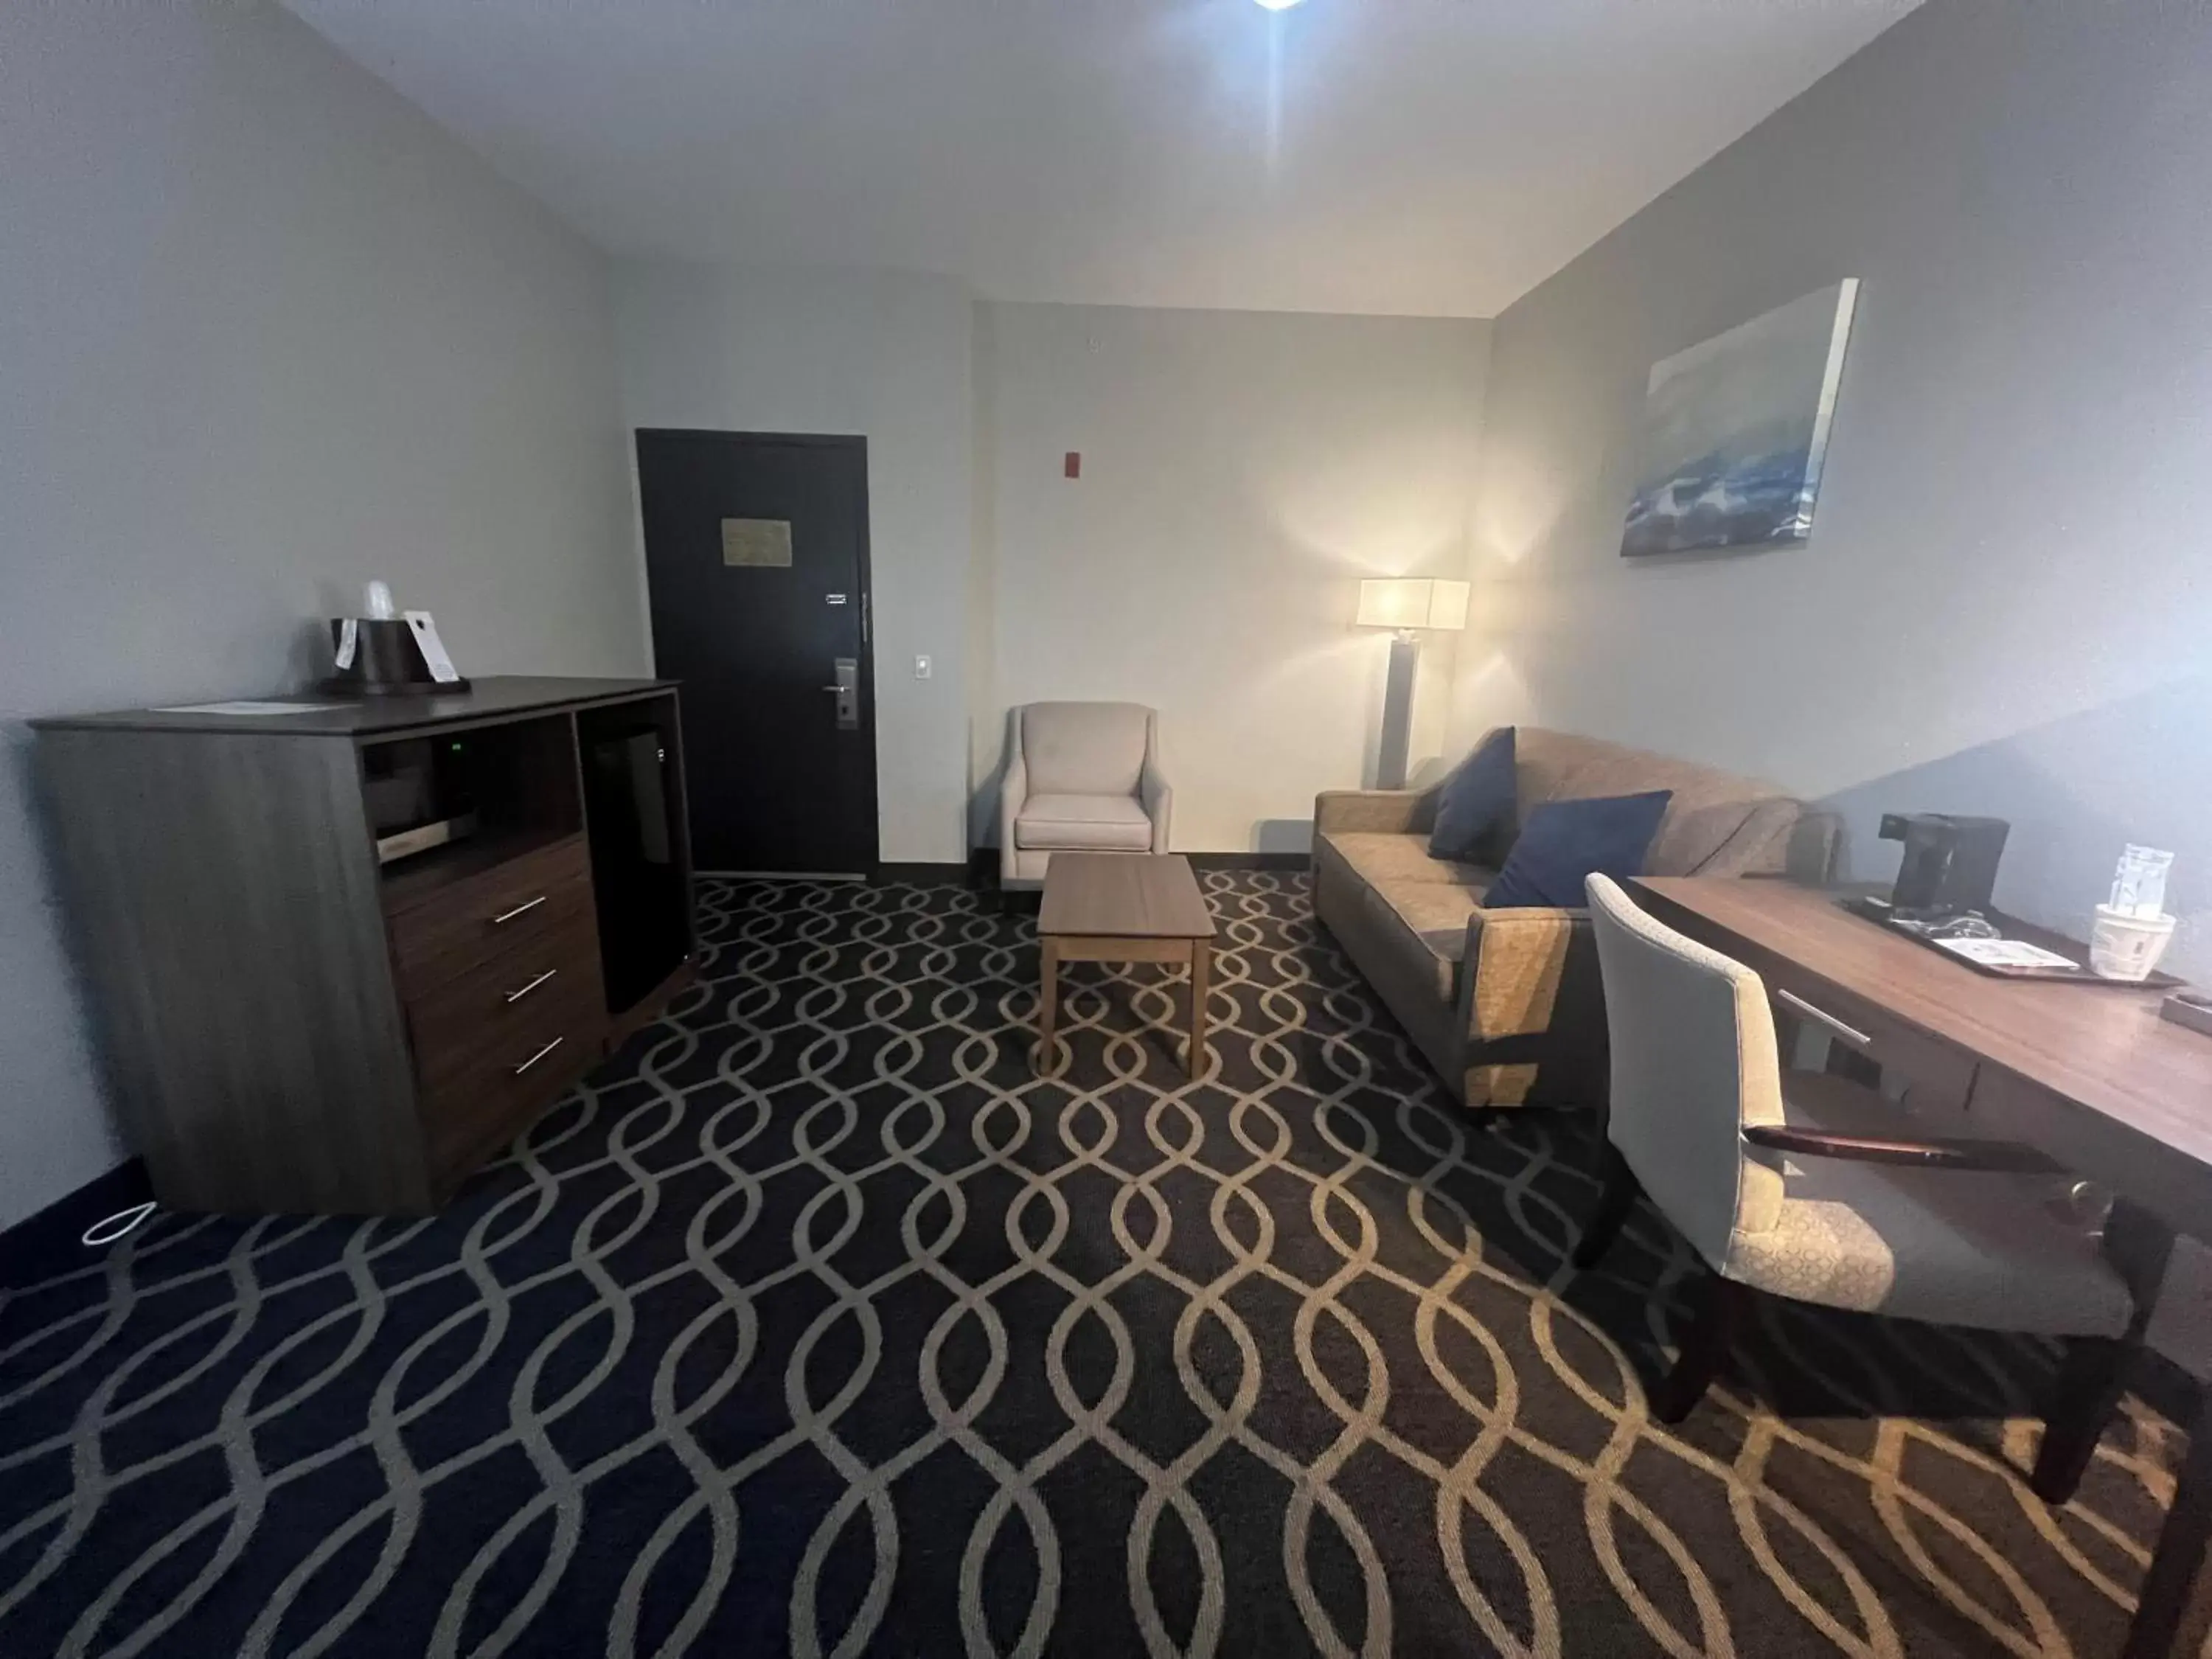 Living room in Wingate by Wyndham Humble/Houston Intercontinental Airport